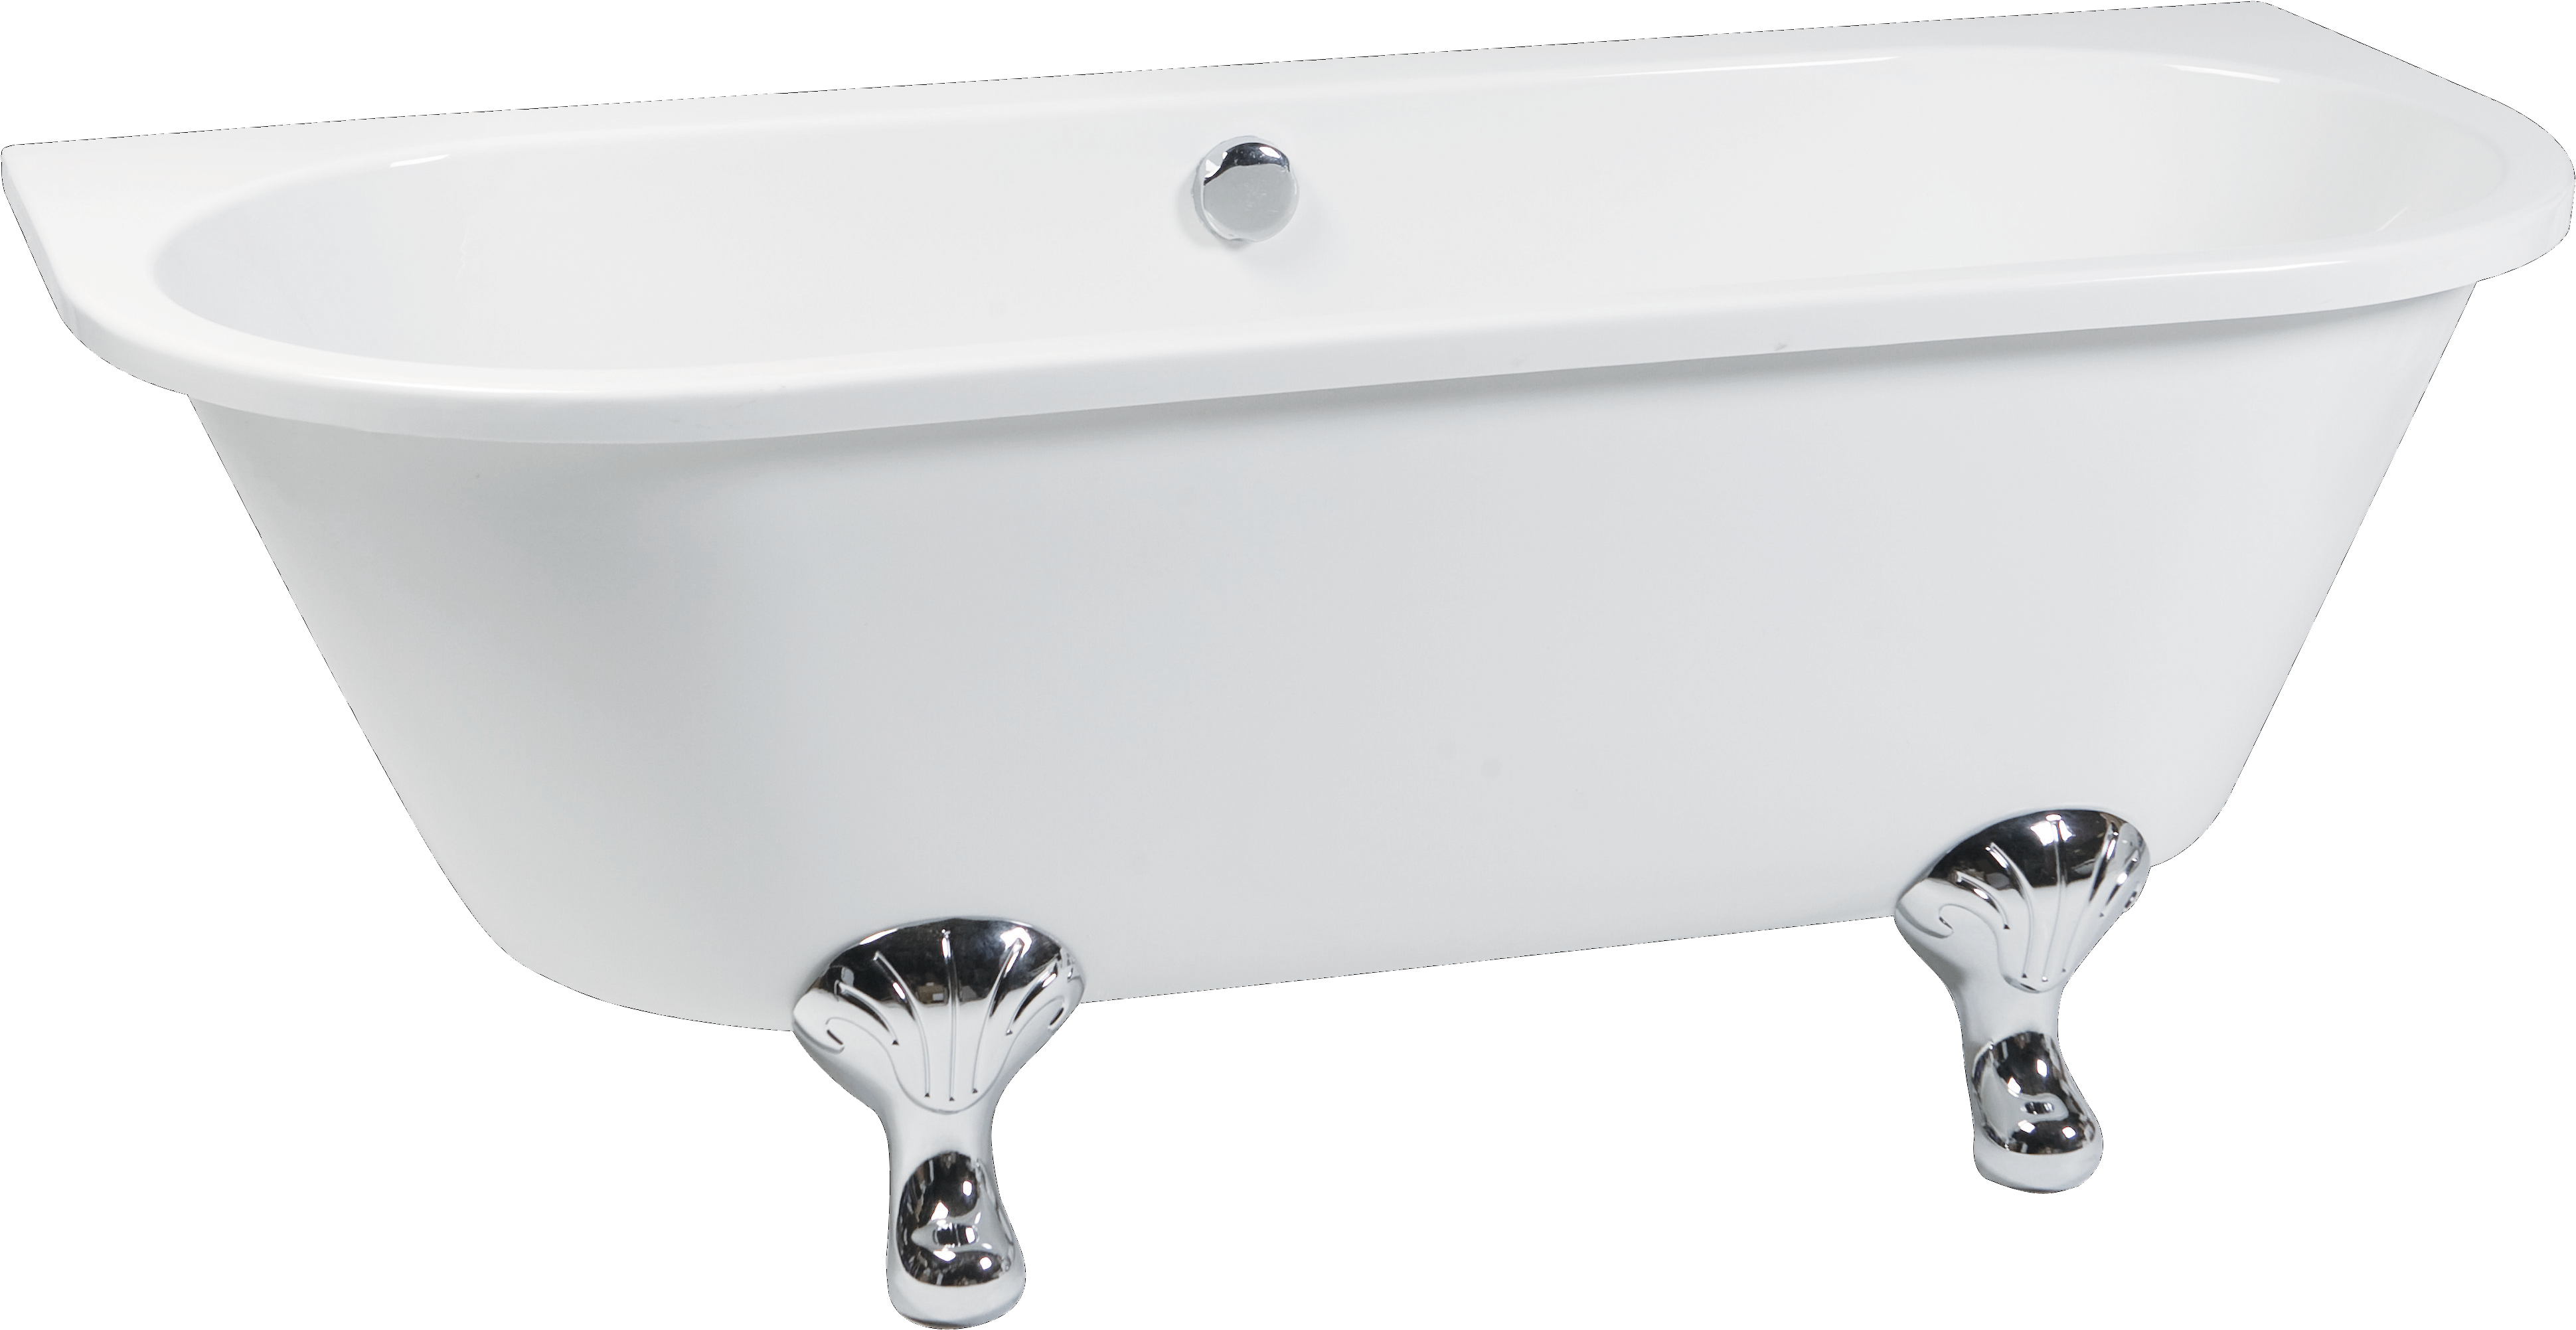 Foot Claw Bathtub Free Download Image PNG Image